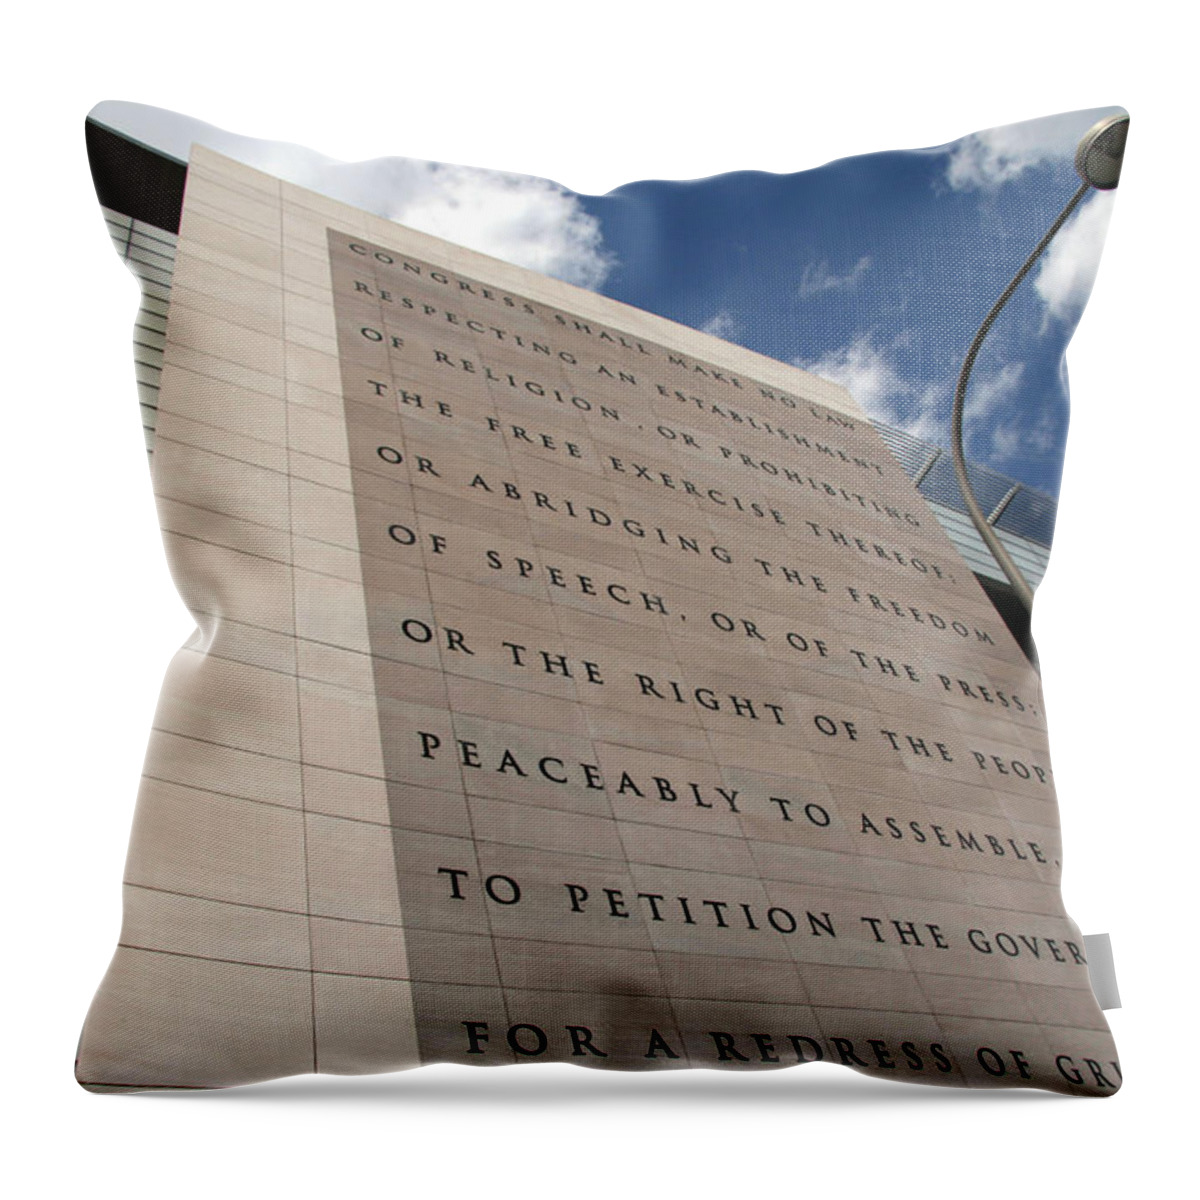 Newseum Throw Pillow featuring the photograph The Newseum by Cora Wandel